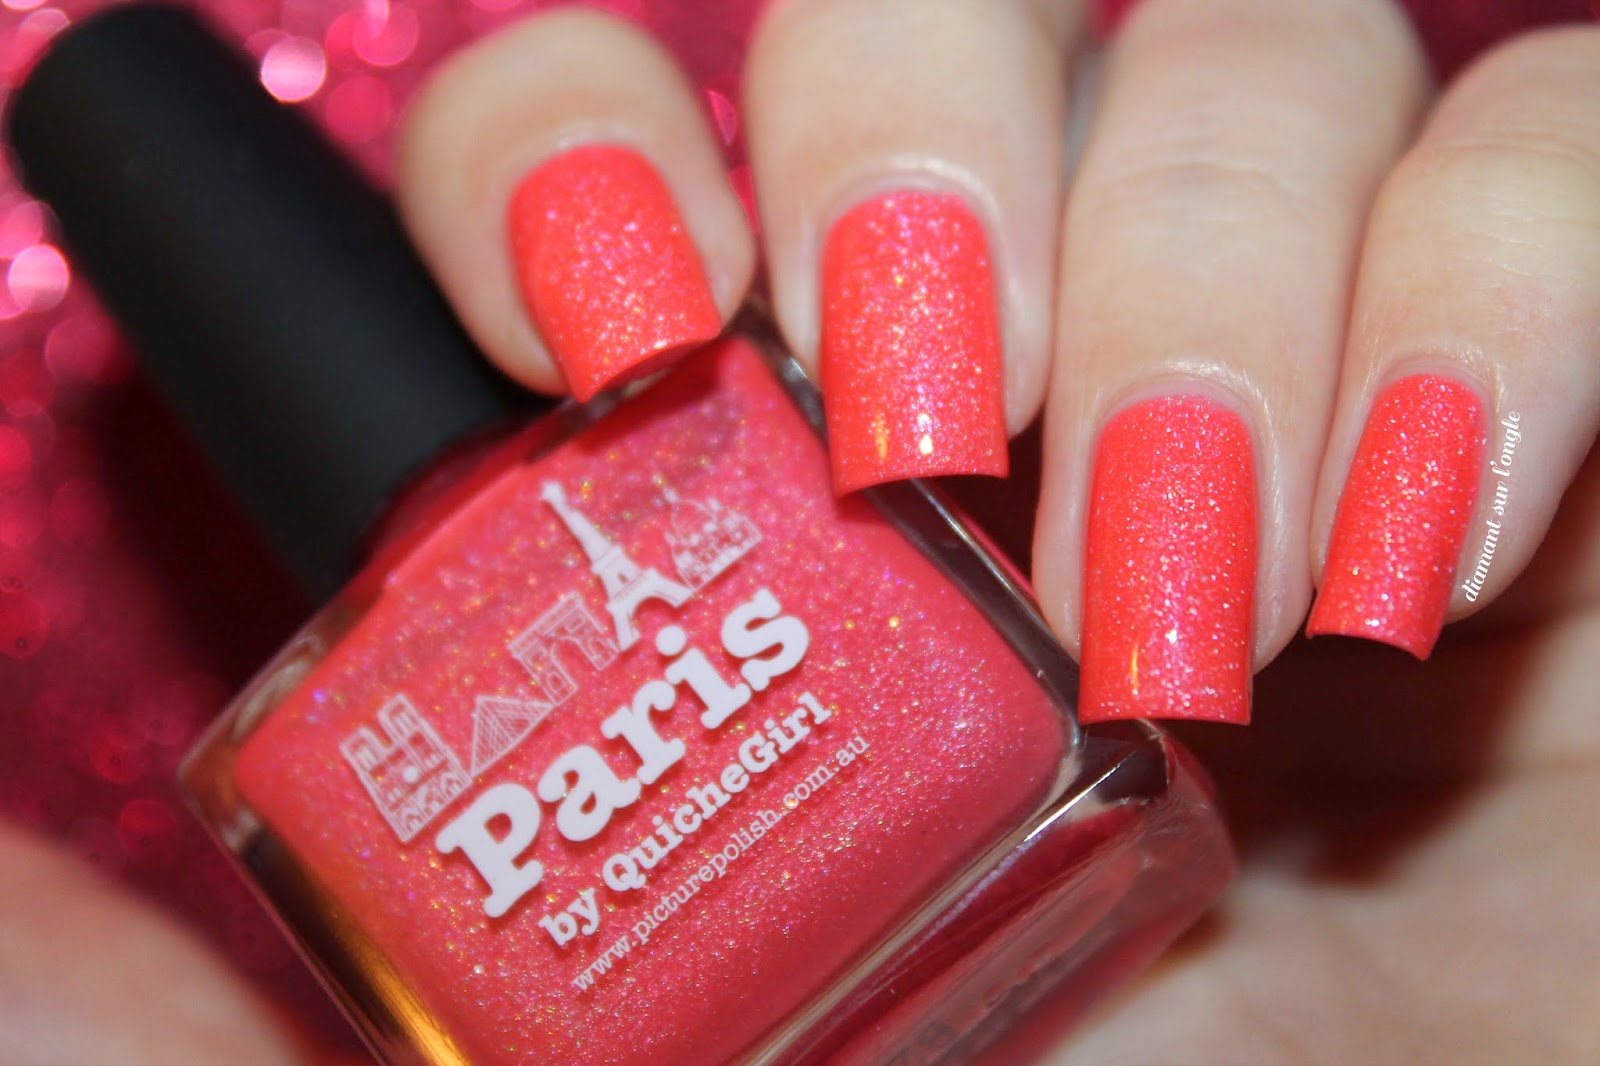 Swatch of the nail polish "Paris" from Picture Polish